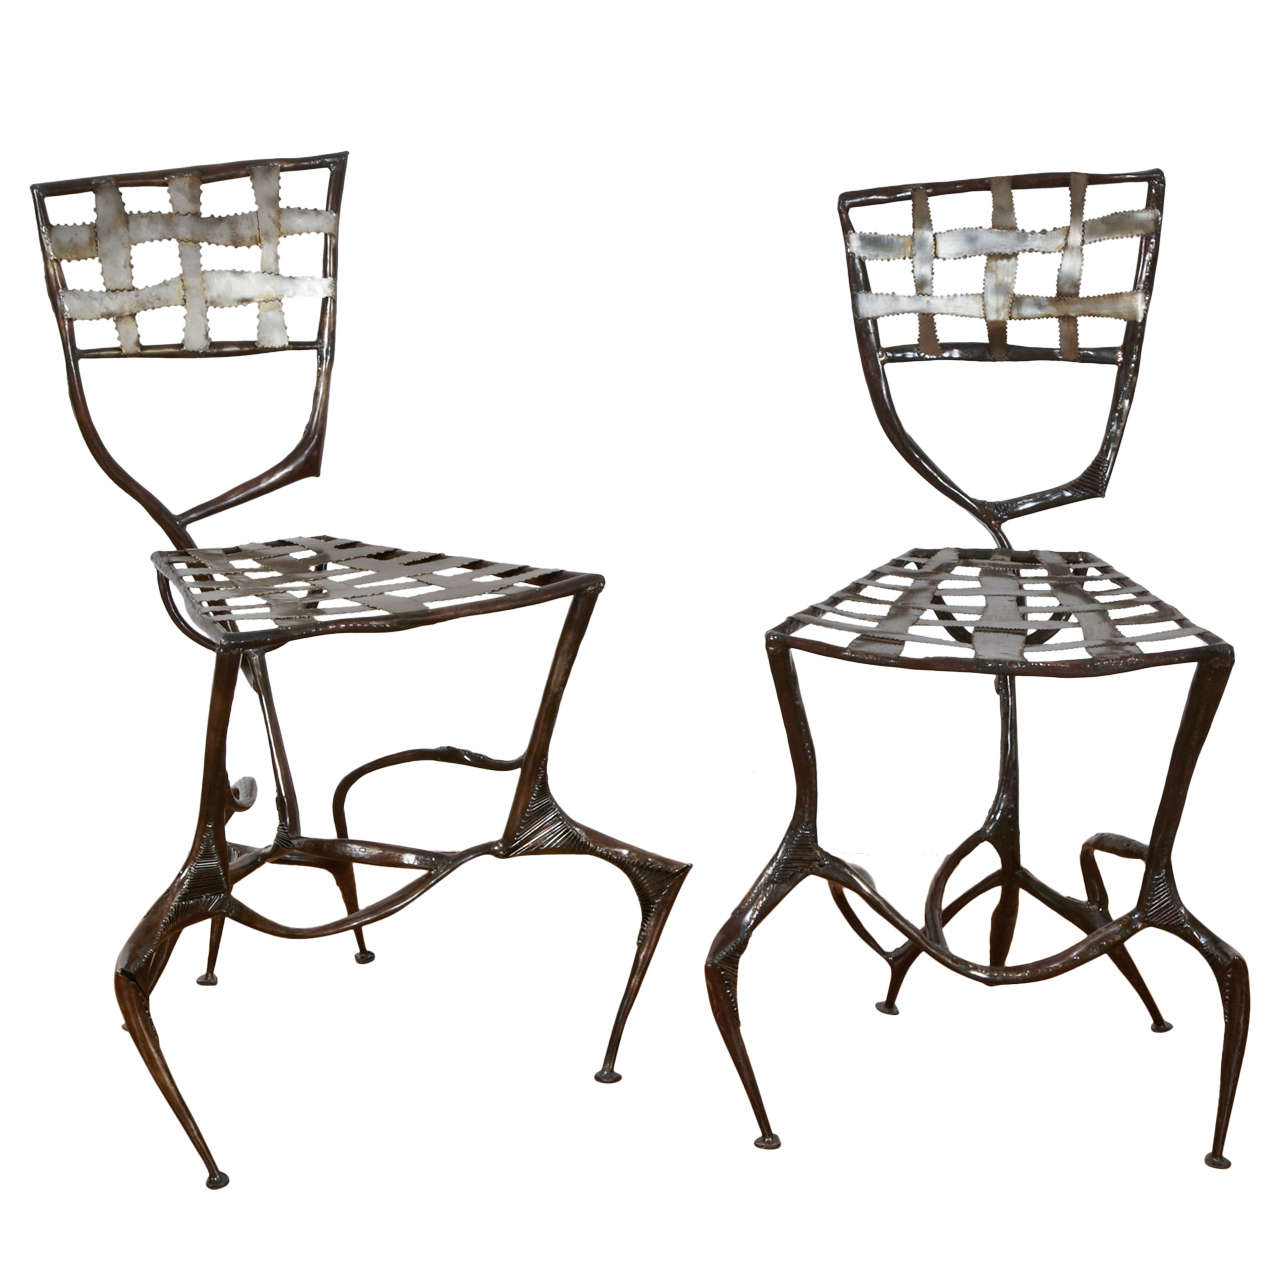 Two Steel Copperware Chairs, 2008 / 2013 by Manuel Simon.